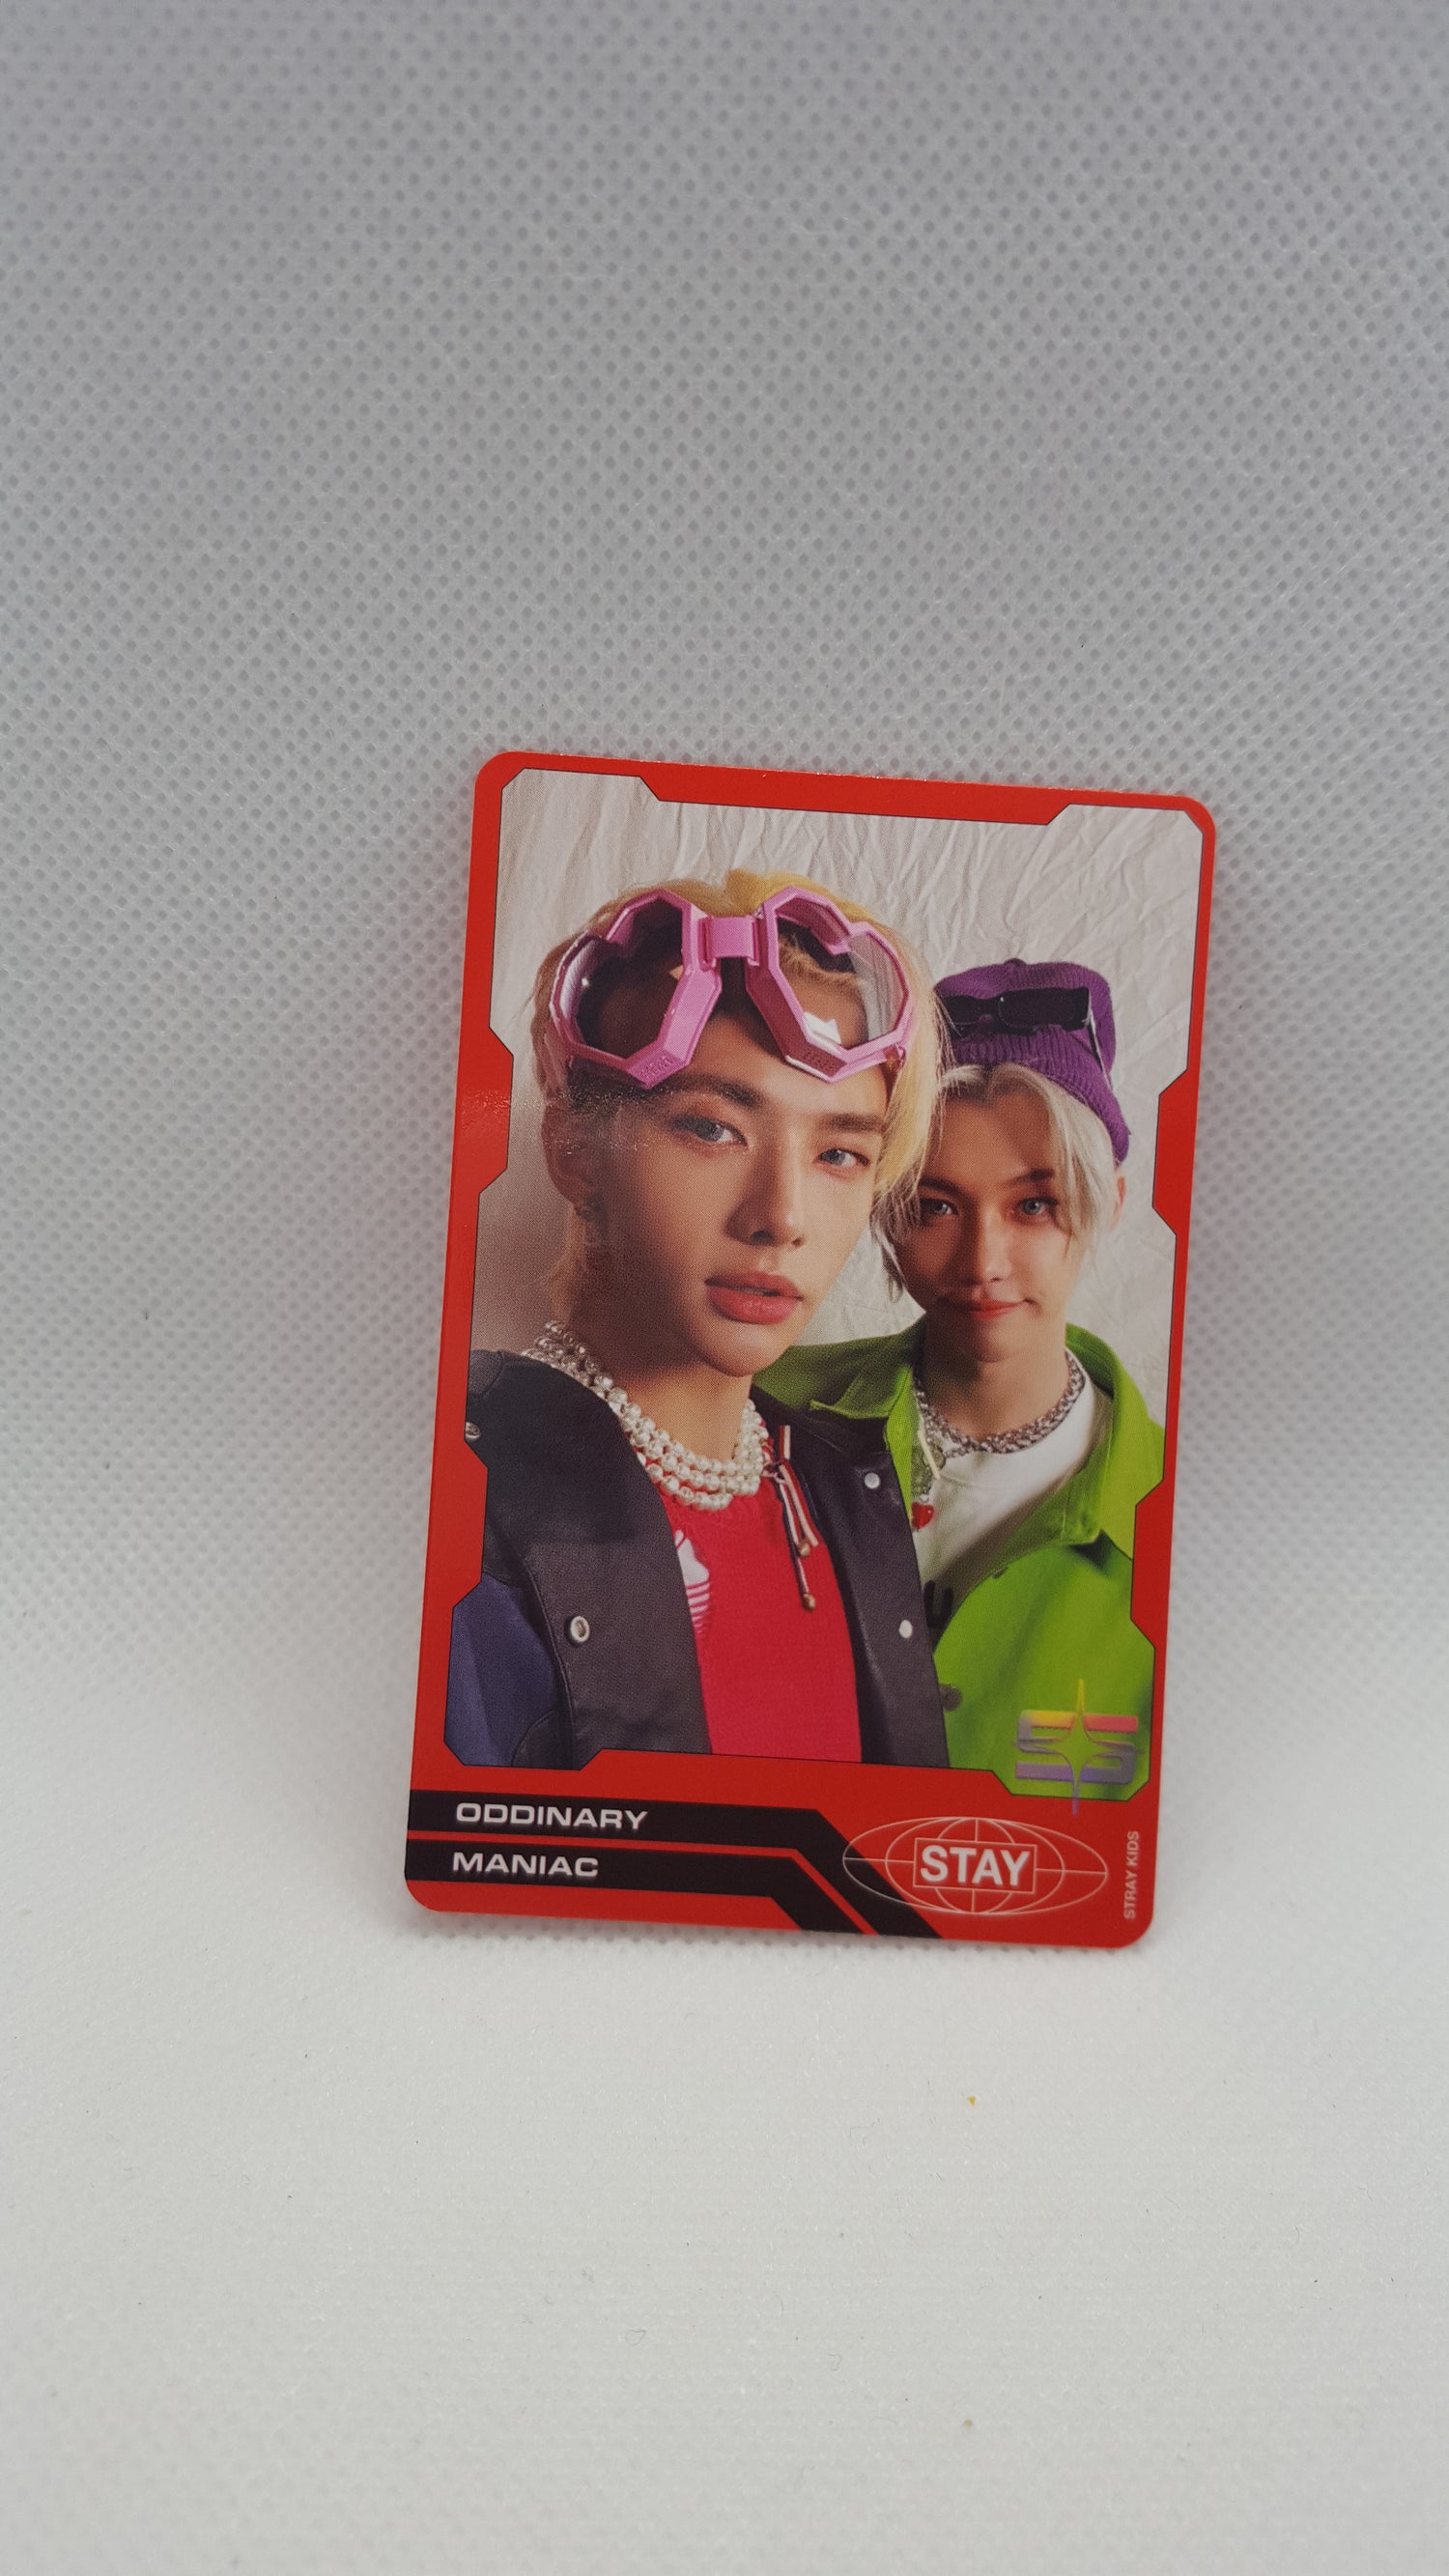 Official Photocards